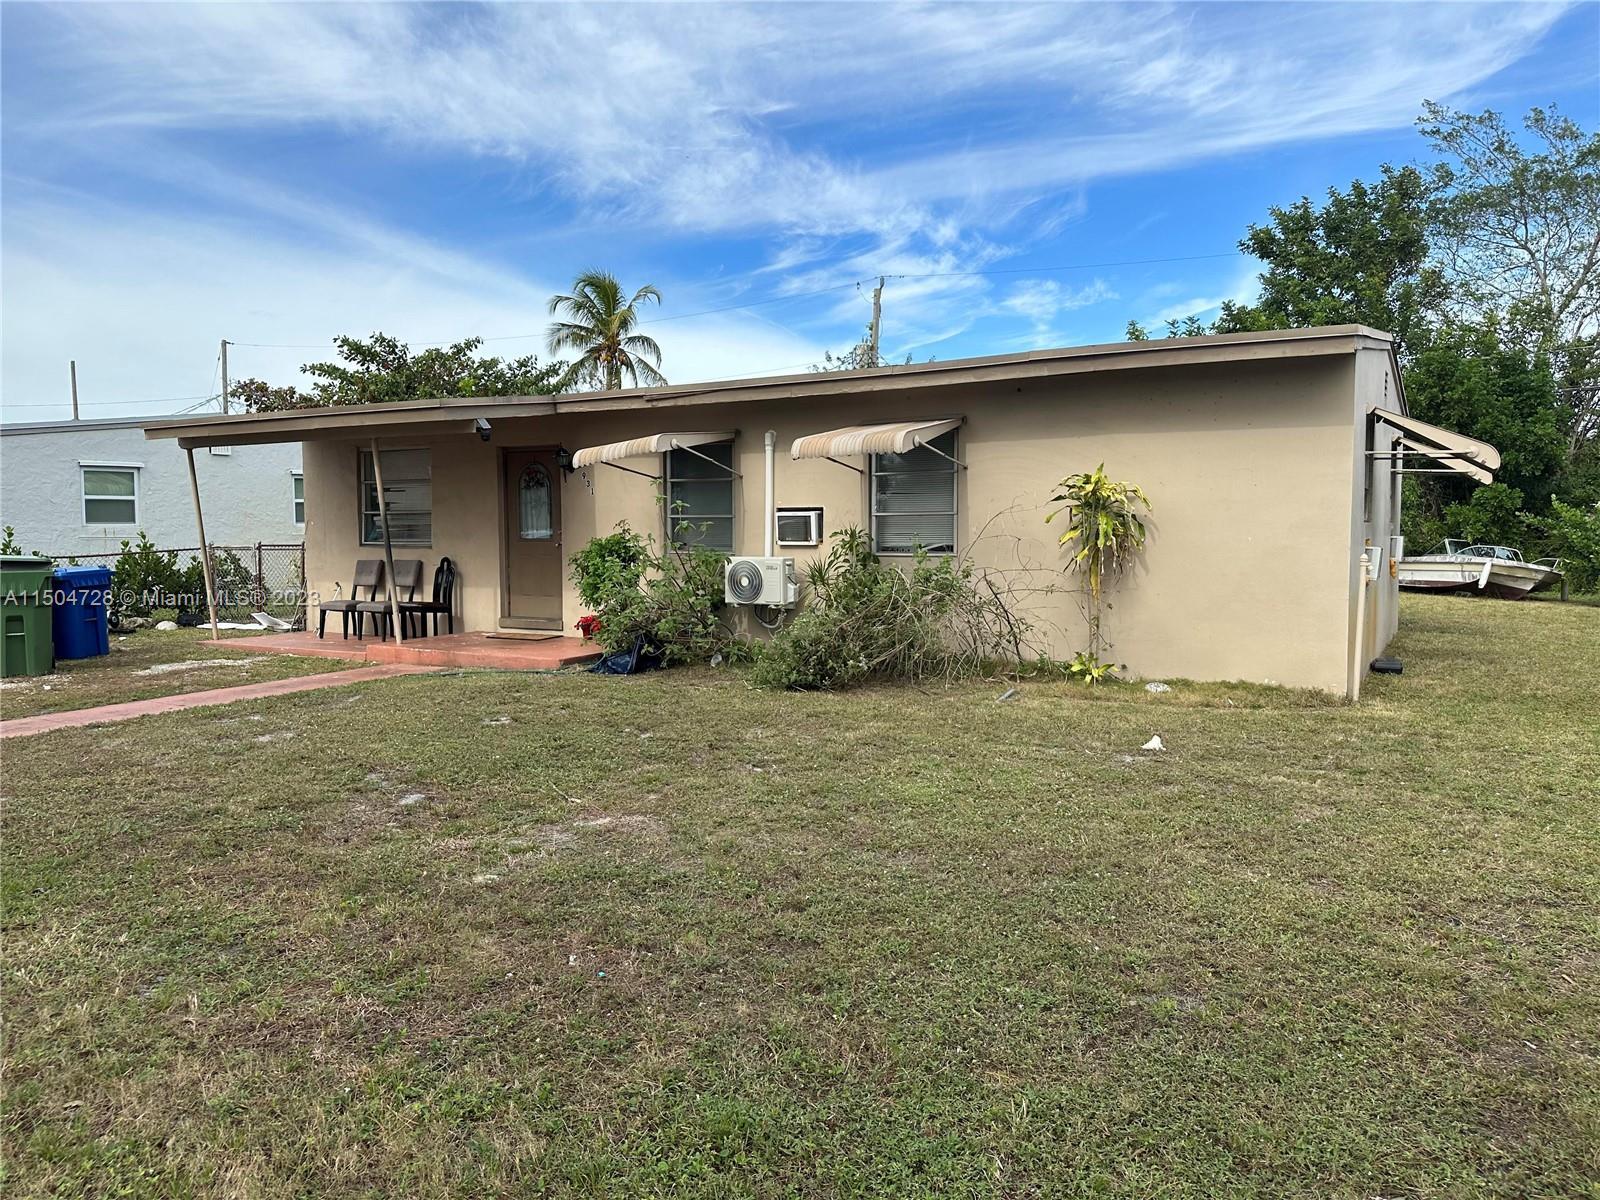 Photo of 931 Chateau Park Dr in Fort Lauderdale, FL